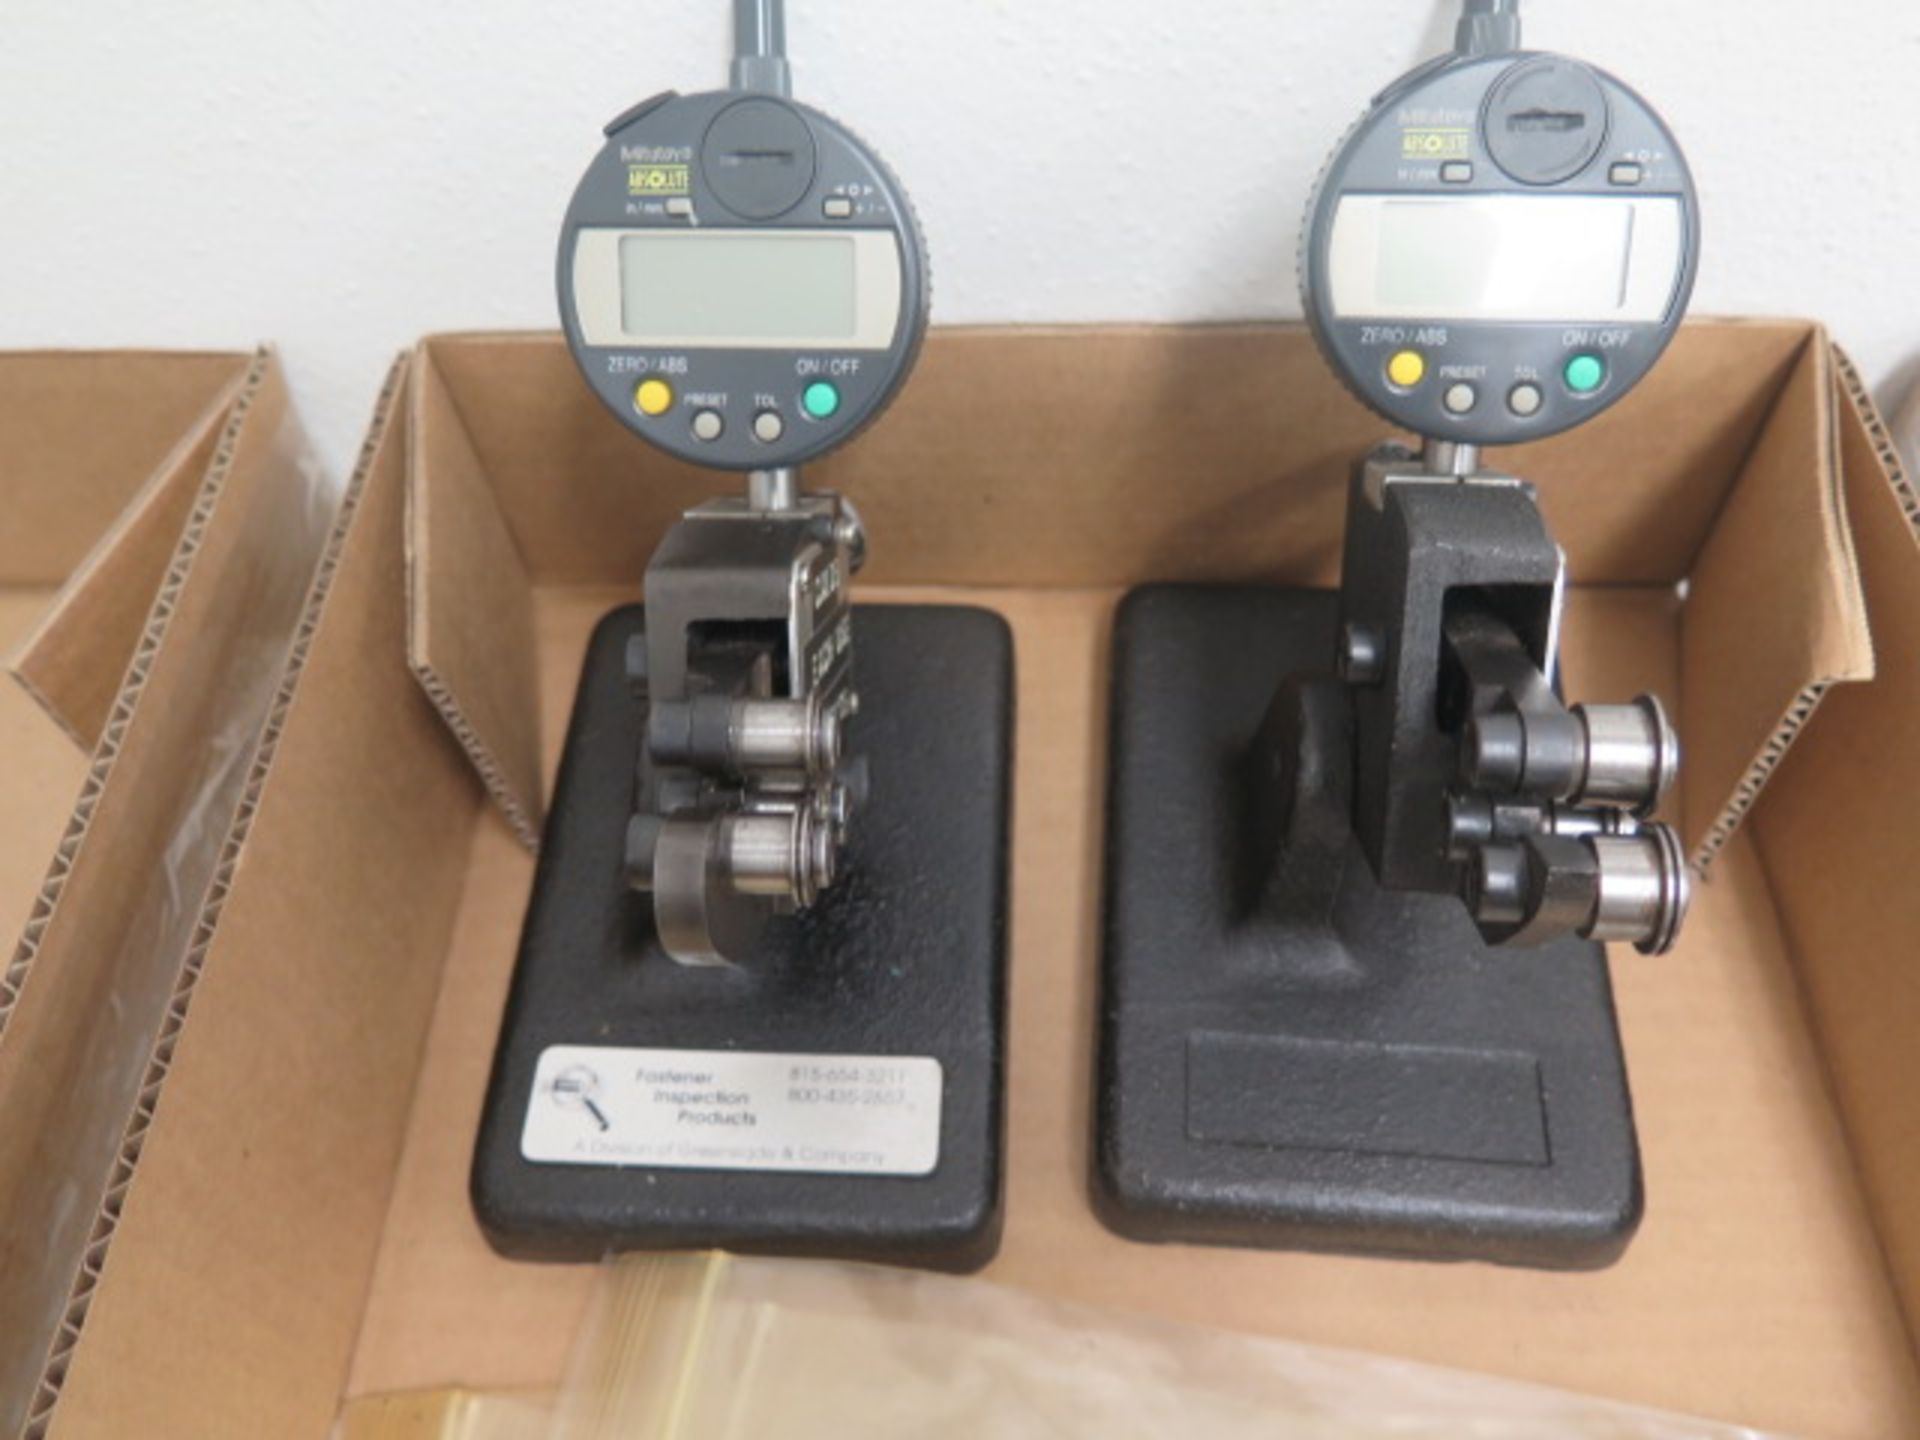 Fastener Inspection Products “Tri-Roll” Thread Gages (2) w/ Digital Indicators and Thread Dies - Image 3 of 3